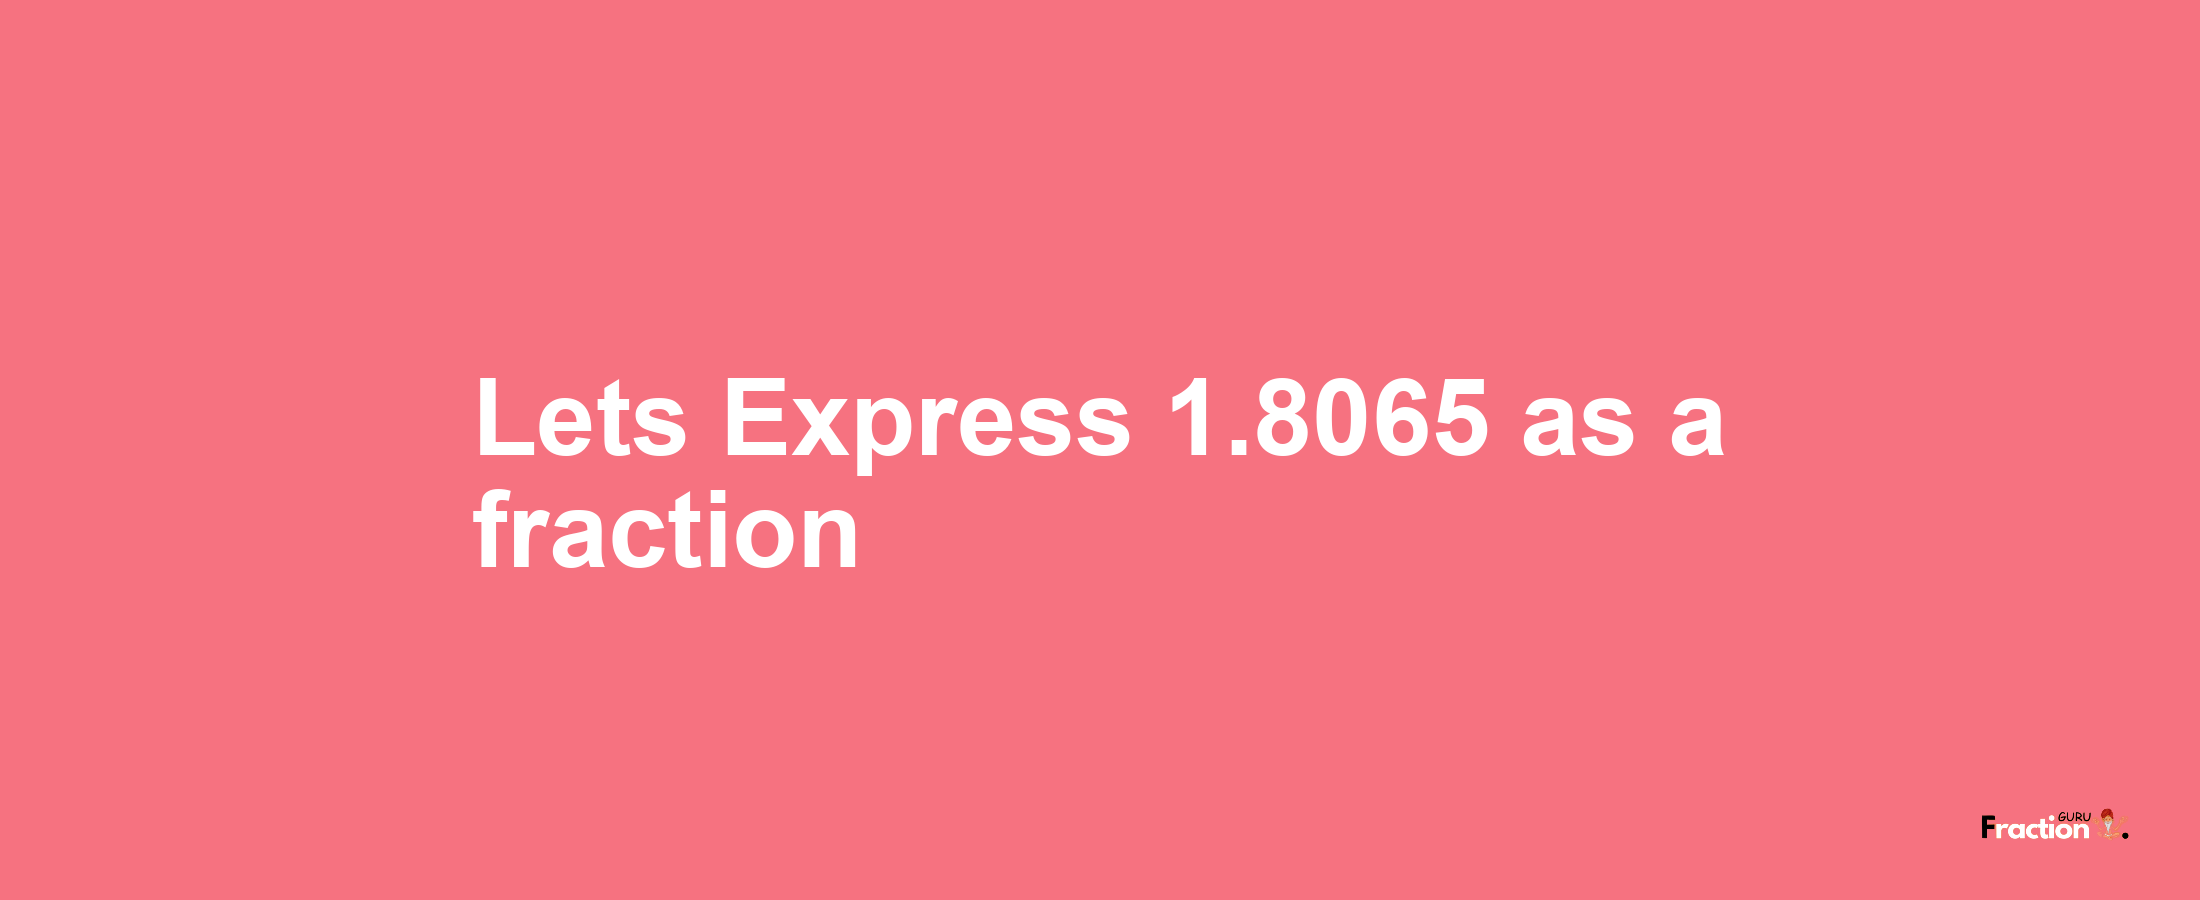 Lets Express 1.8065 as afraction